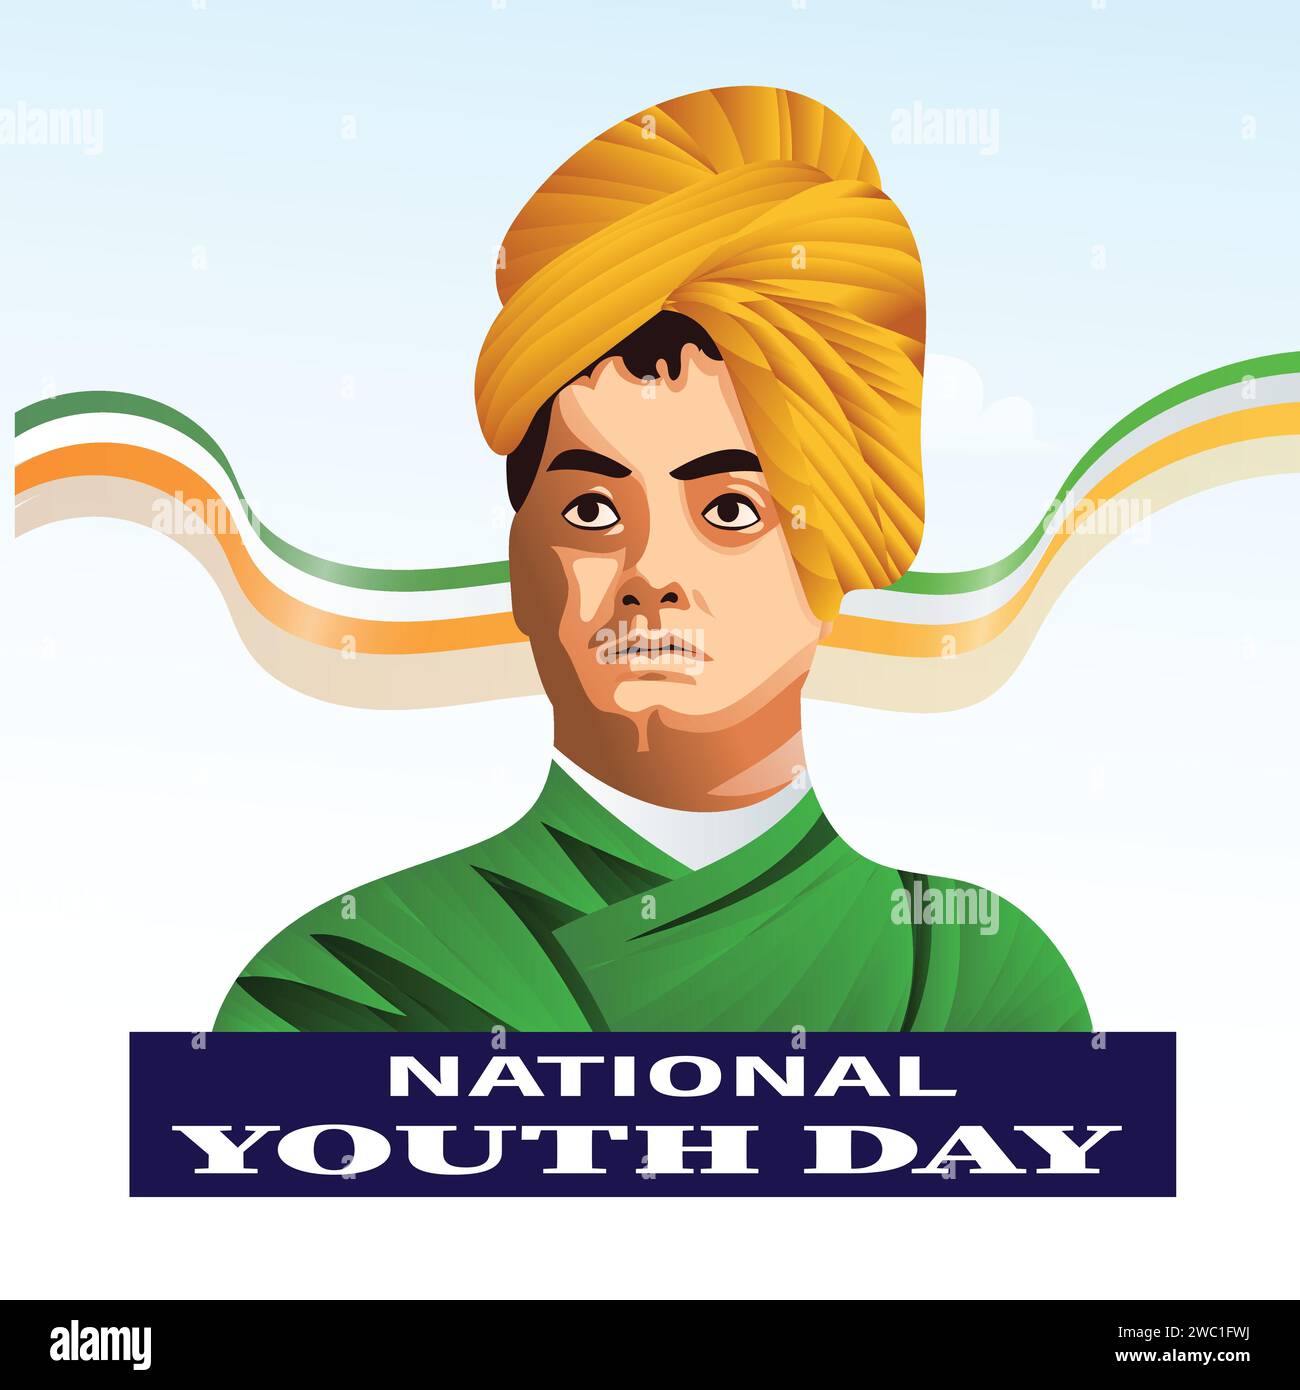 National Youth Day 2021 - Ruby Park Public School